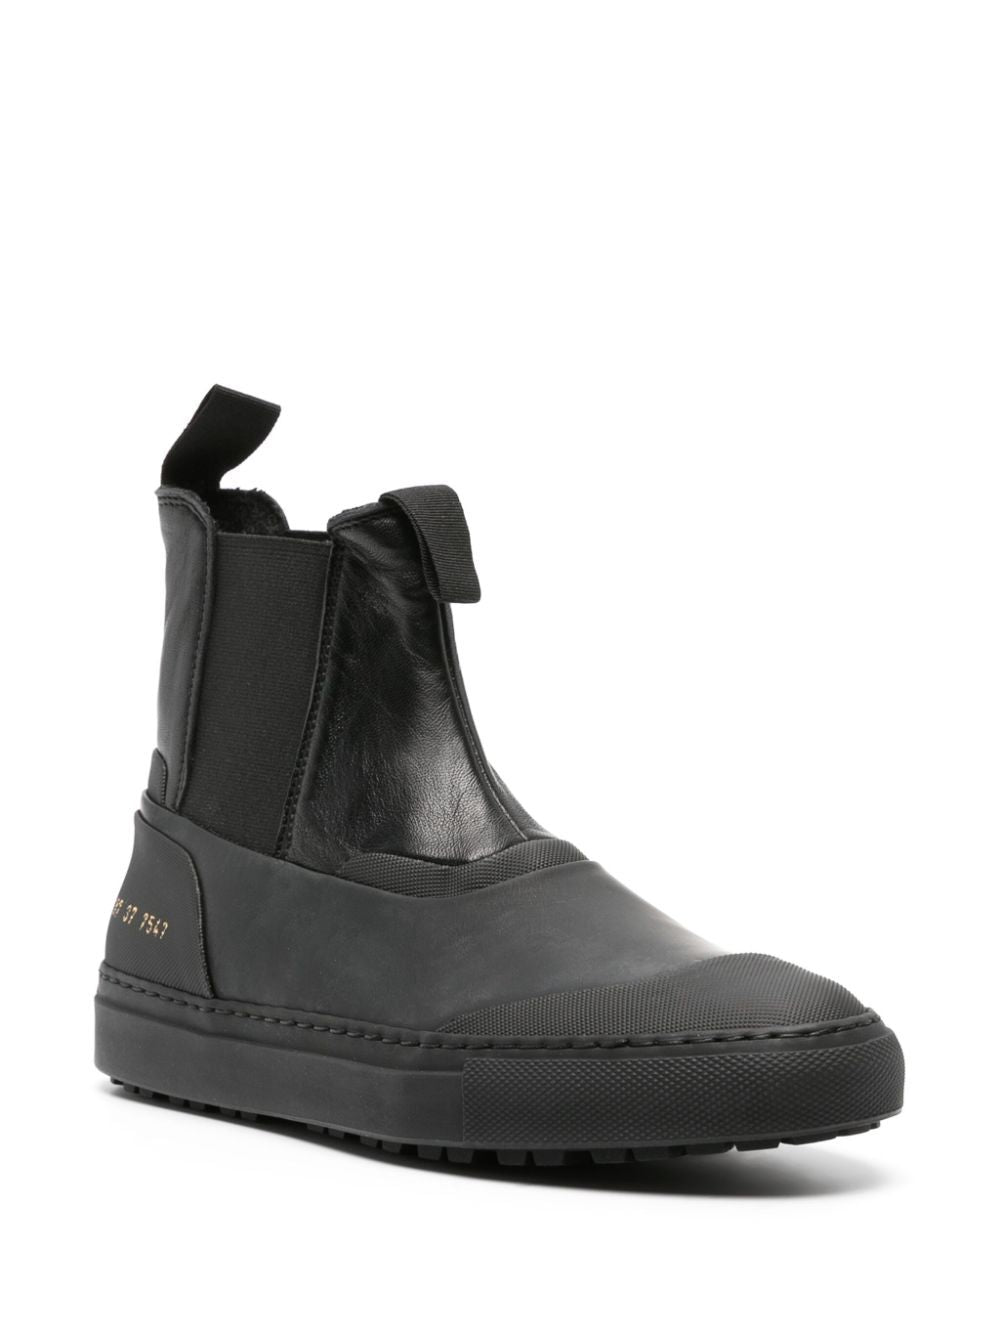 COMMON PROJECTS Black Chelsea Special Edition Boots for Women